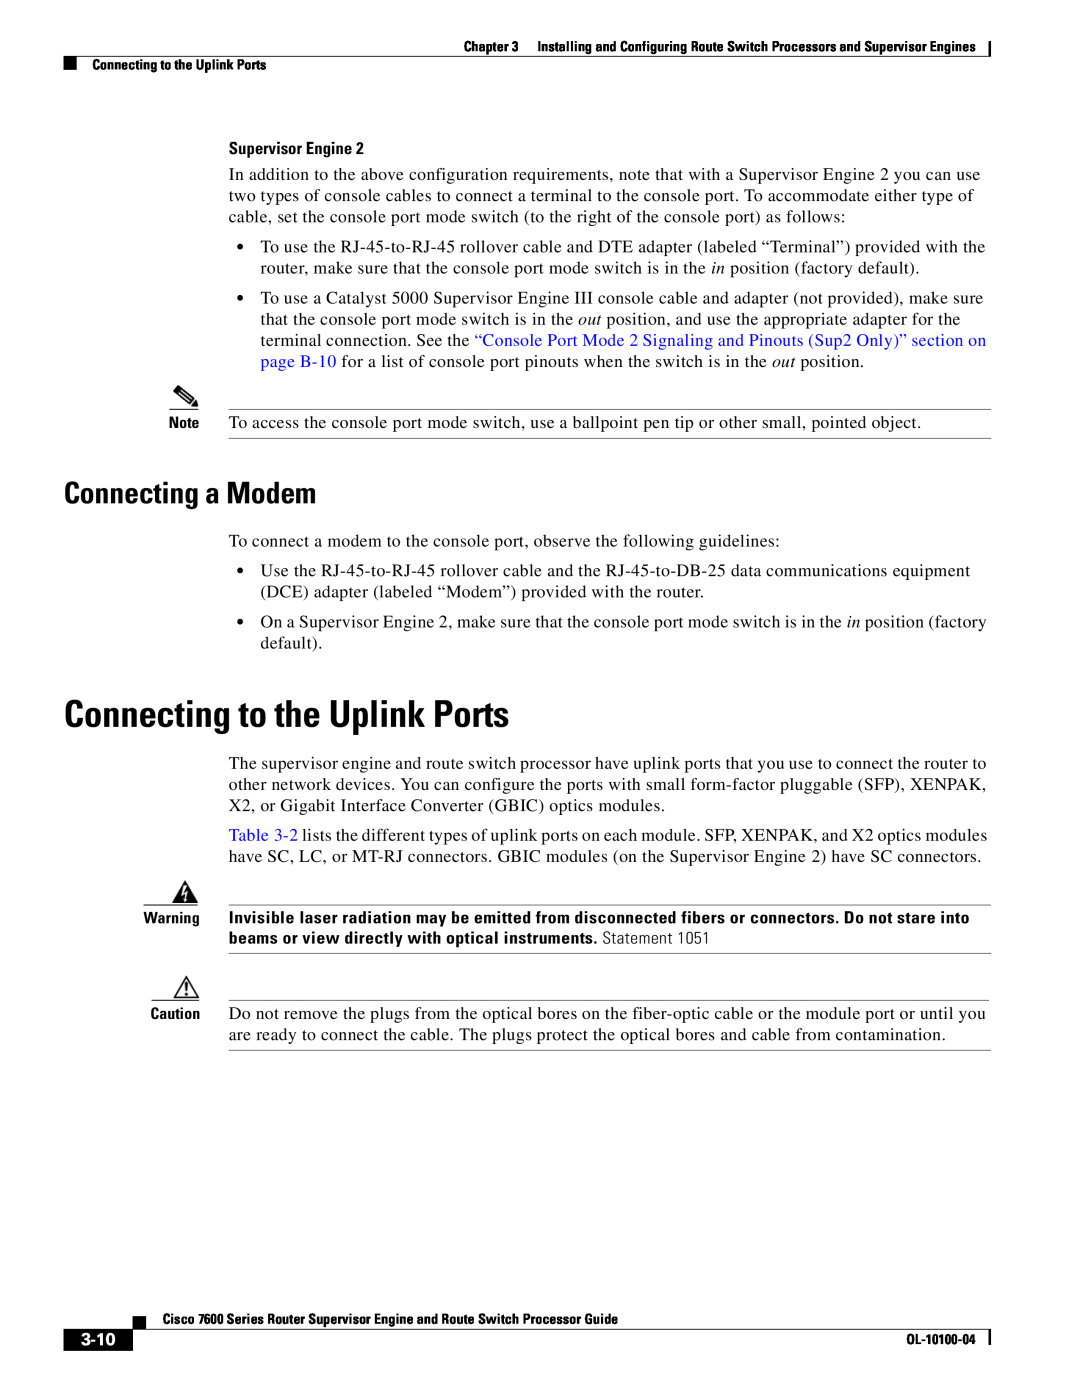 Cisco Systems 7600 manual Connecting to the Uplink Ports, Connecting a Modem, 3-10 